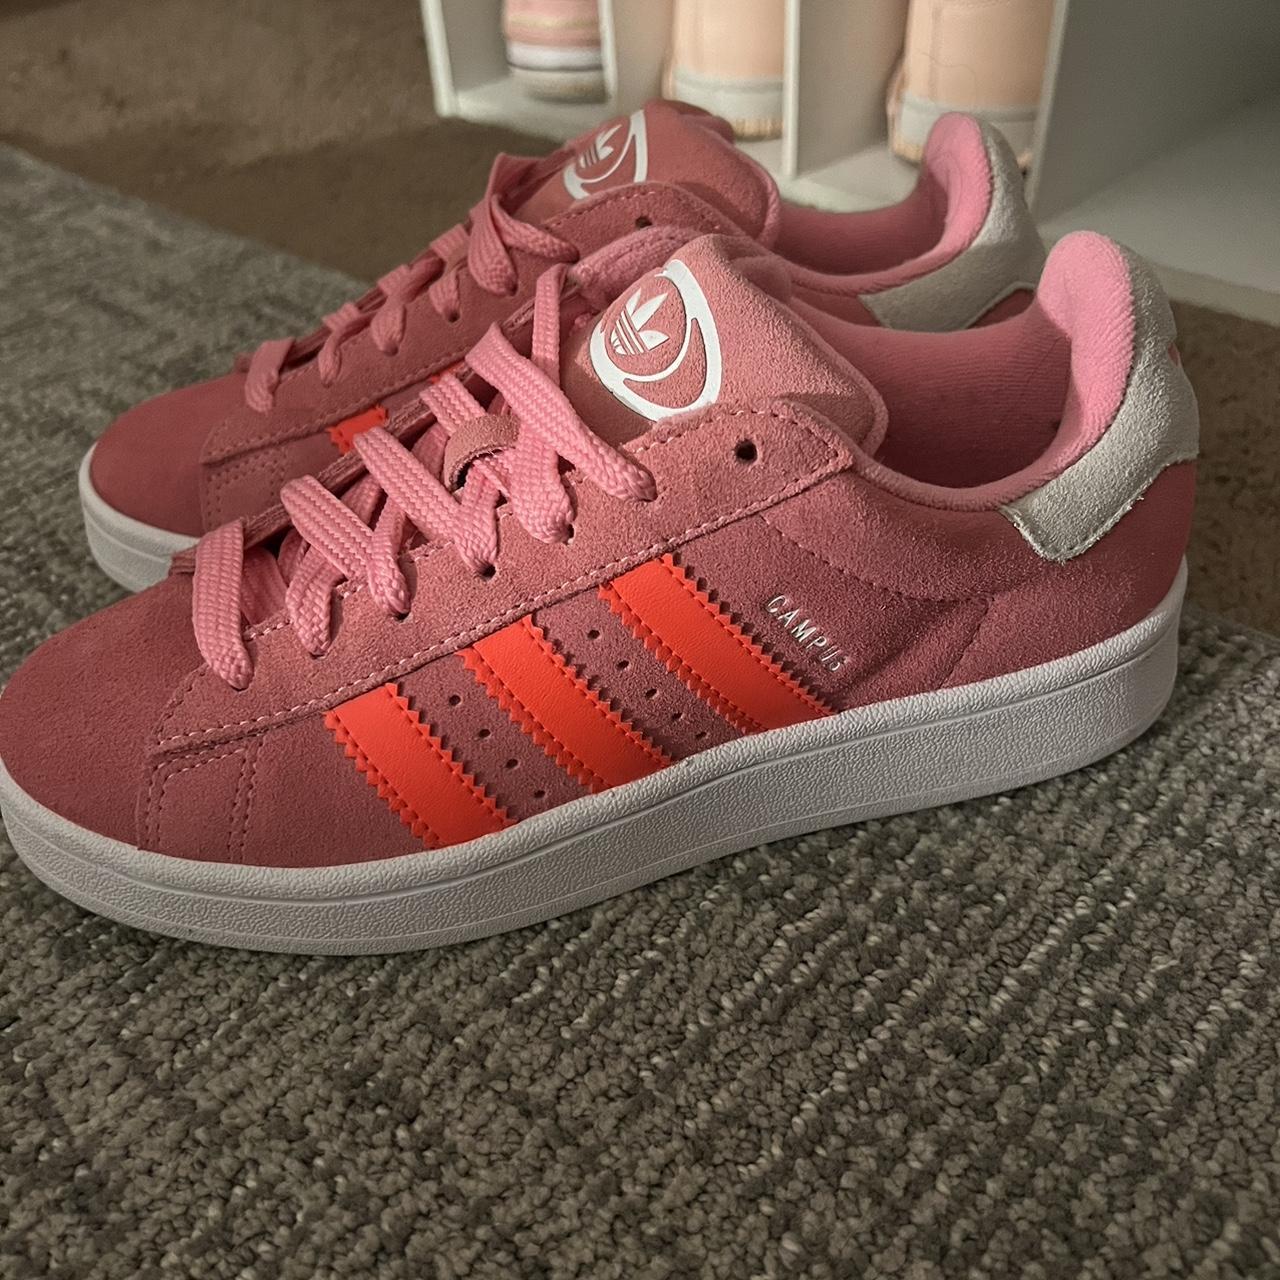 ADIDAS ORIGINALS CAMPUS 00S CASUAL SHOES Only worn a... - Depop